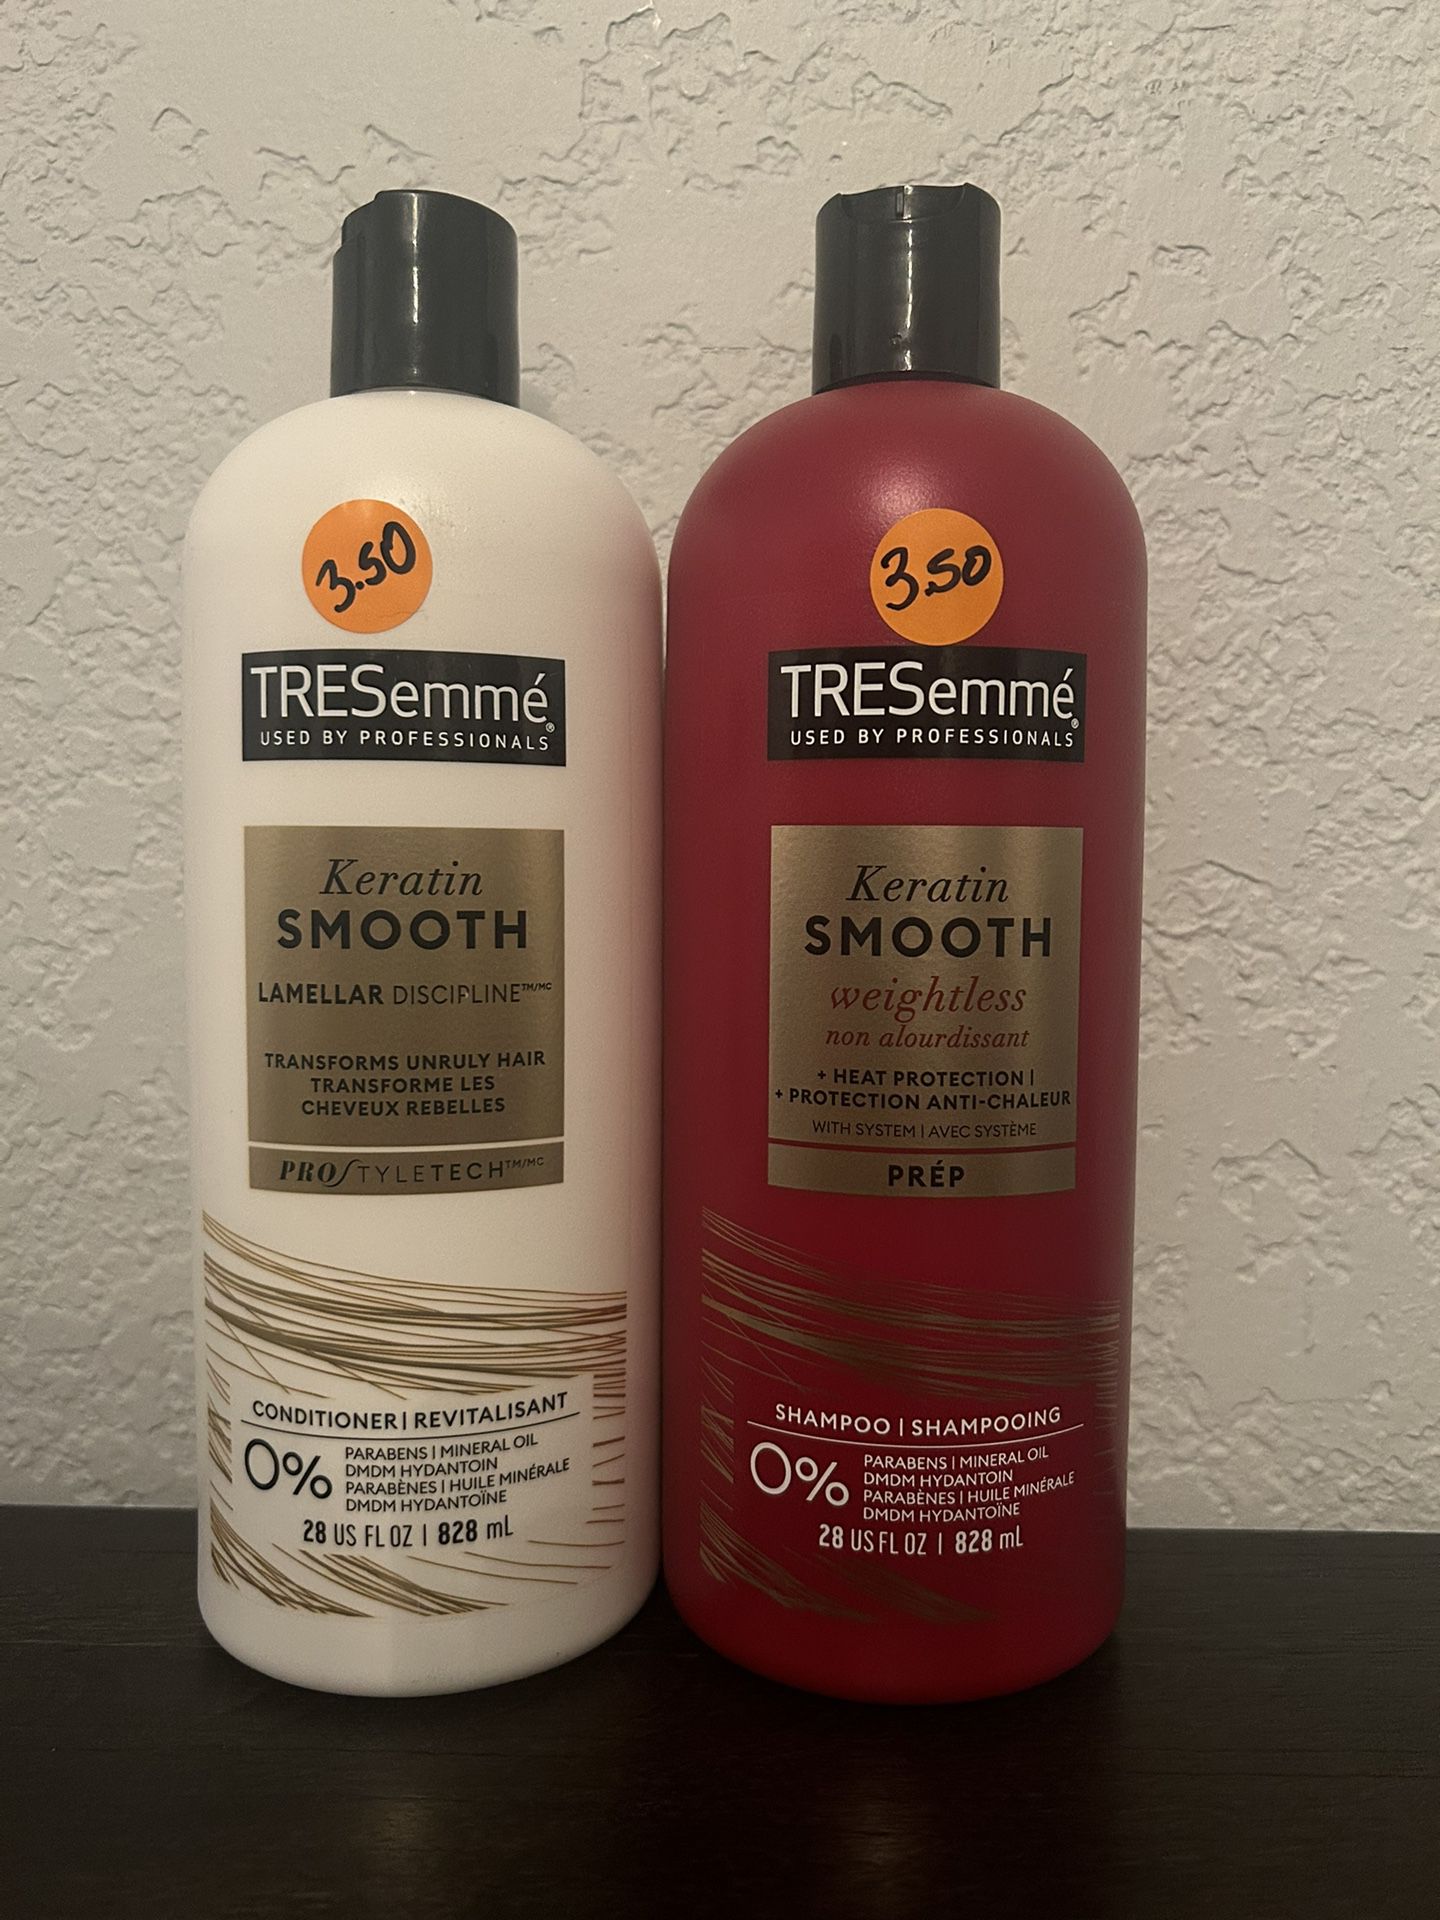 Tresemme Set $7 Firm Prices 